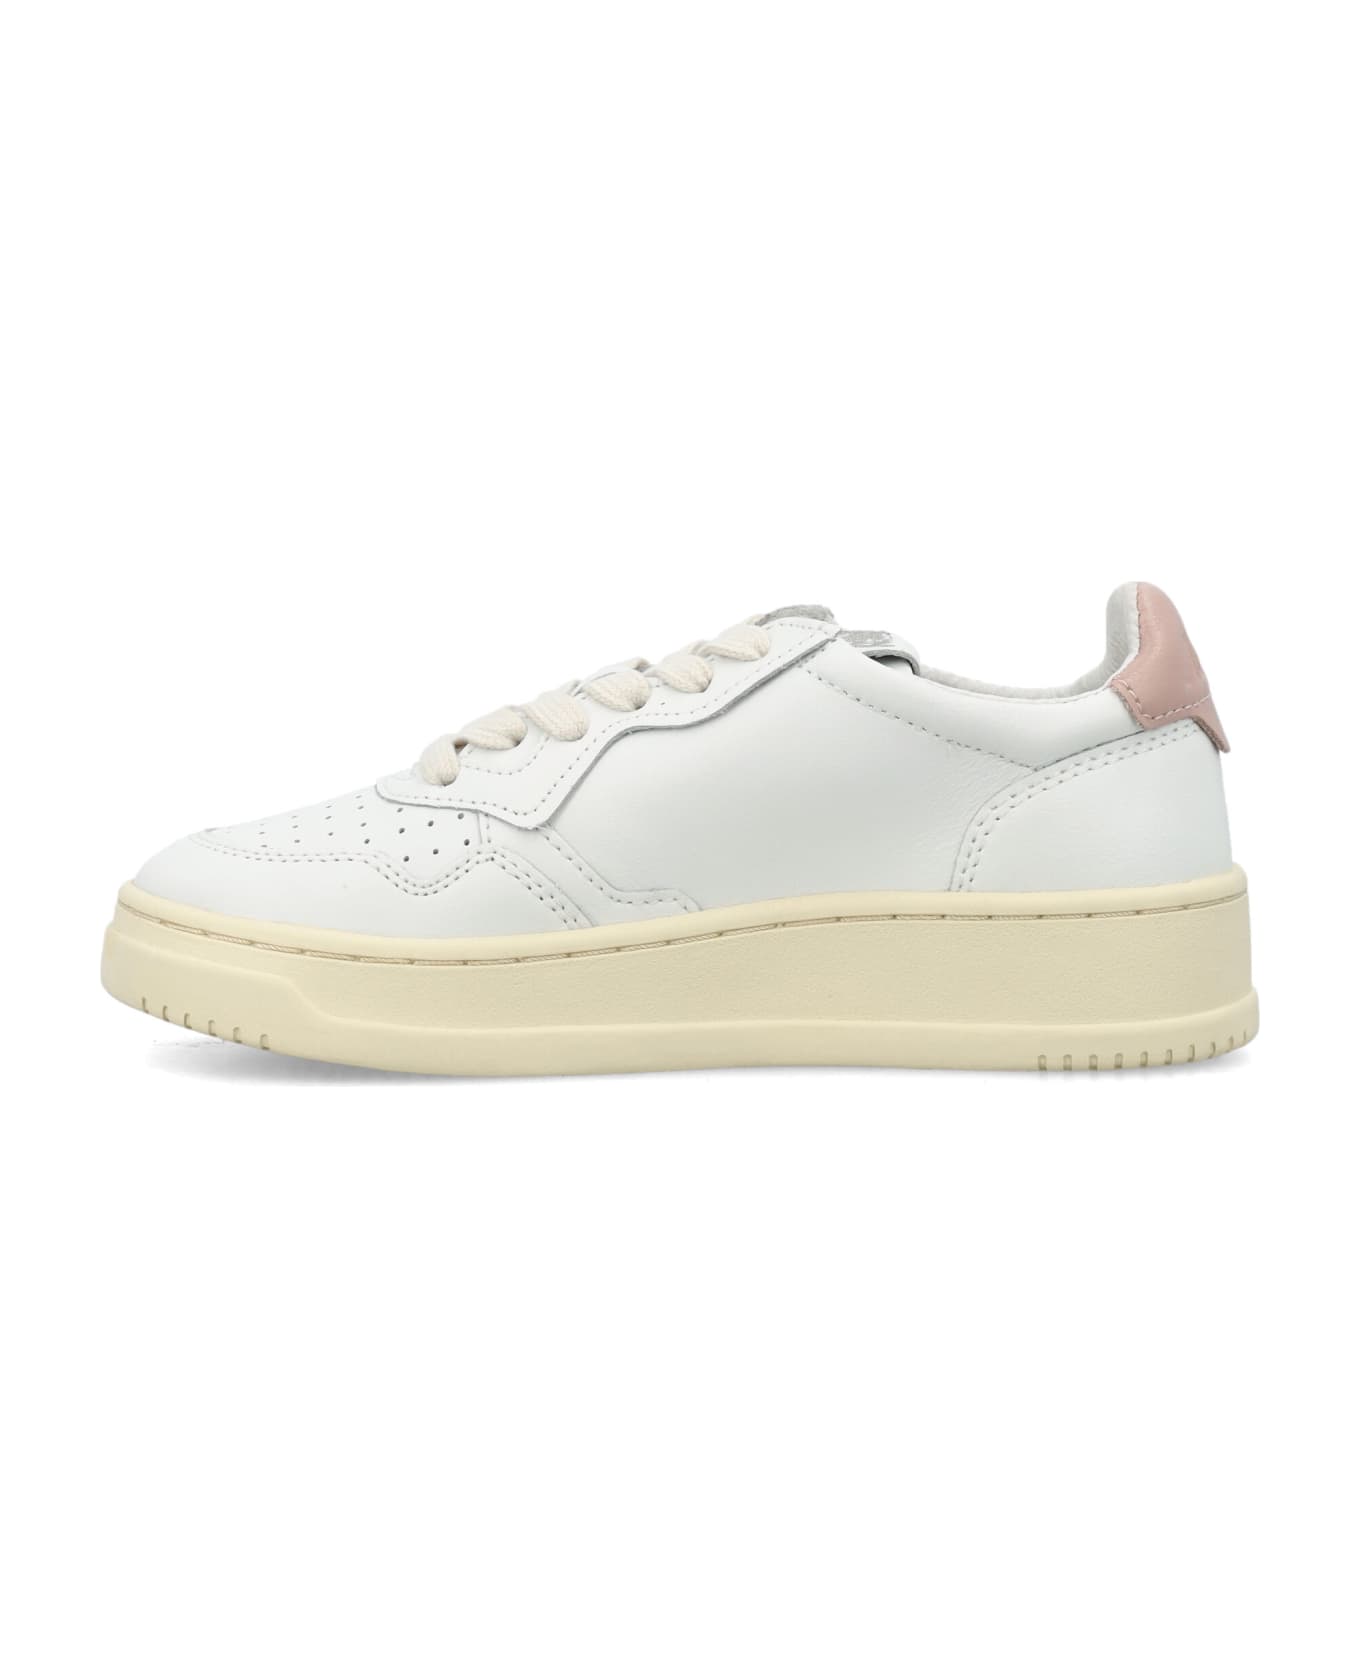 Autry Medalist Low Sneakers - WHITE PINK シューズ